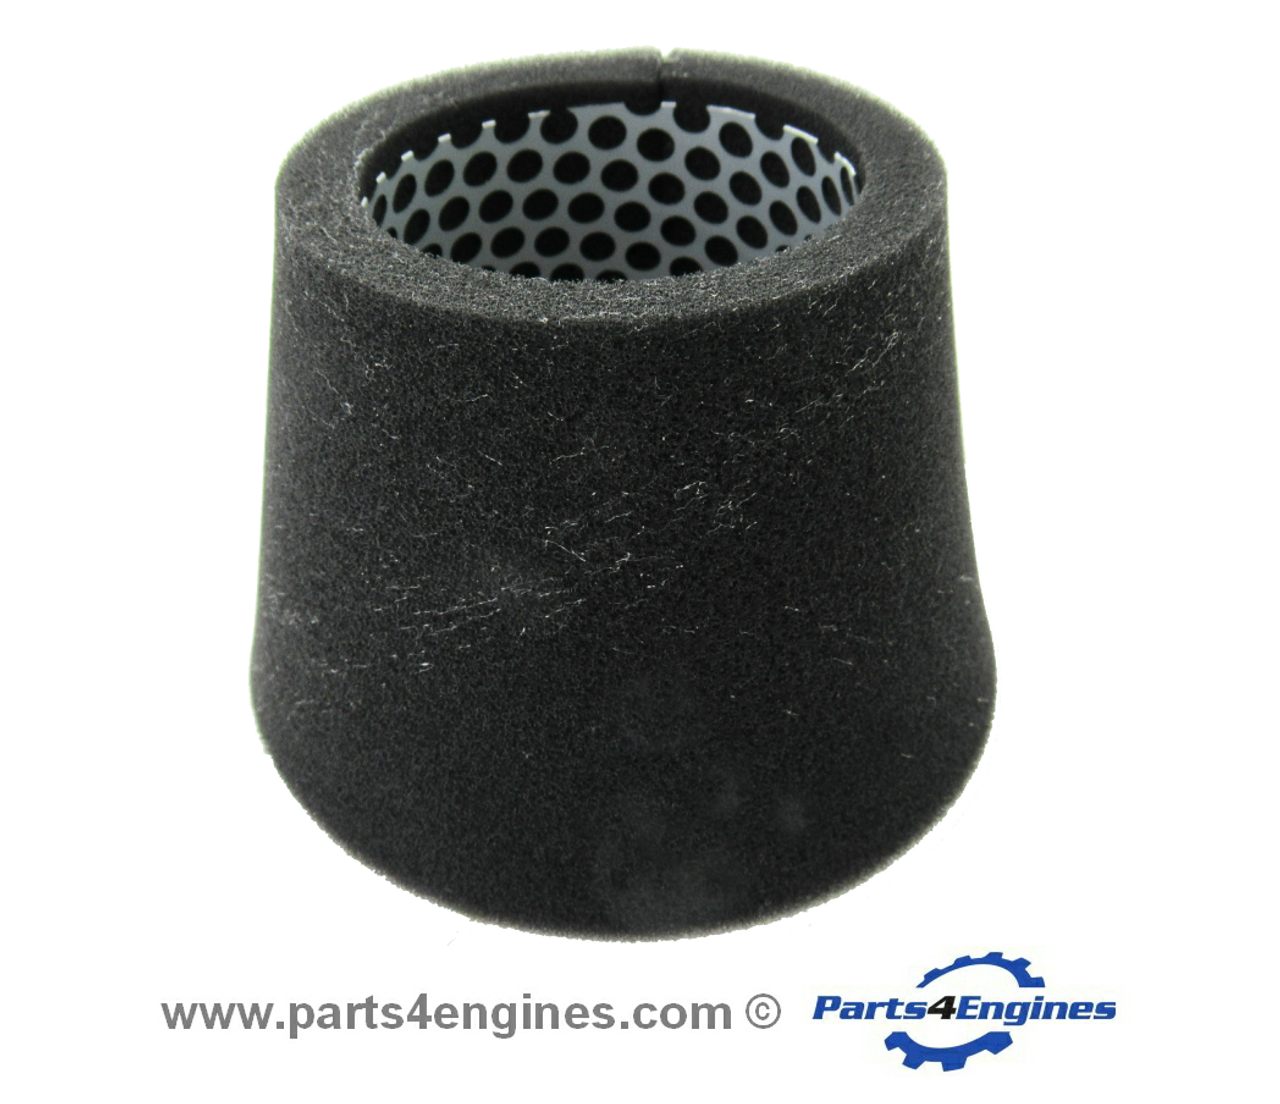 Yanmar 2GM20 Air Filter, from parts4engines.com 